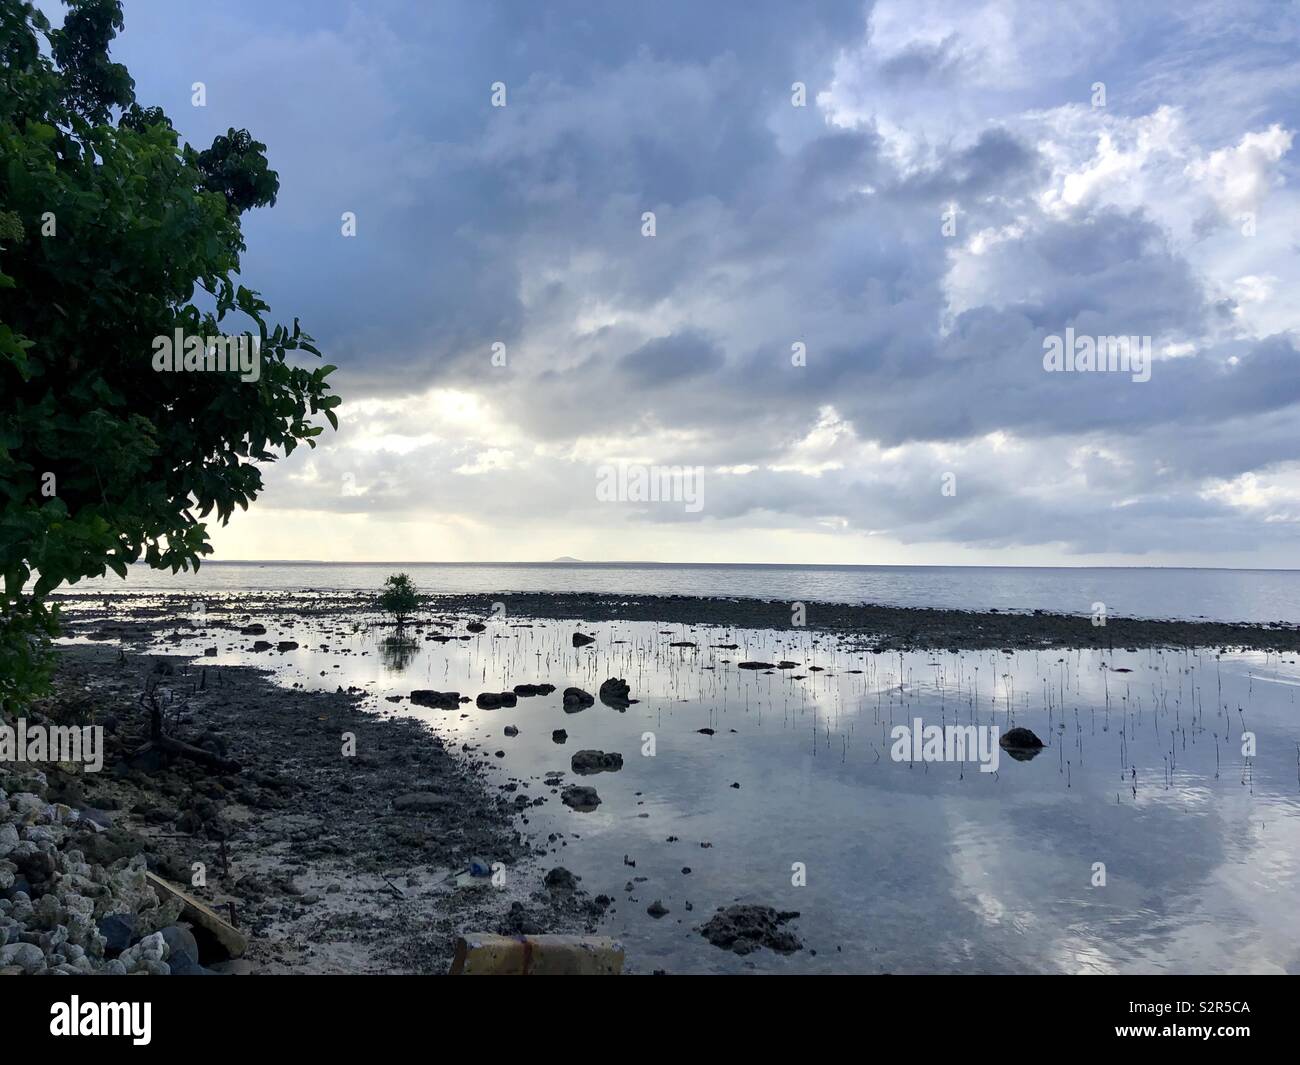 Coastal area of conflicted town, Patikul, Sulu where mangroves are growing along the shoreline. Stock Photo